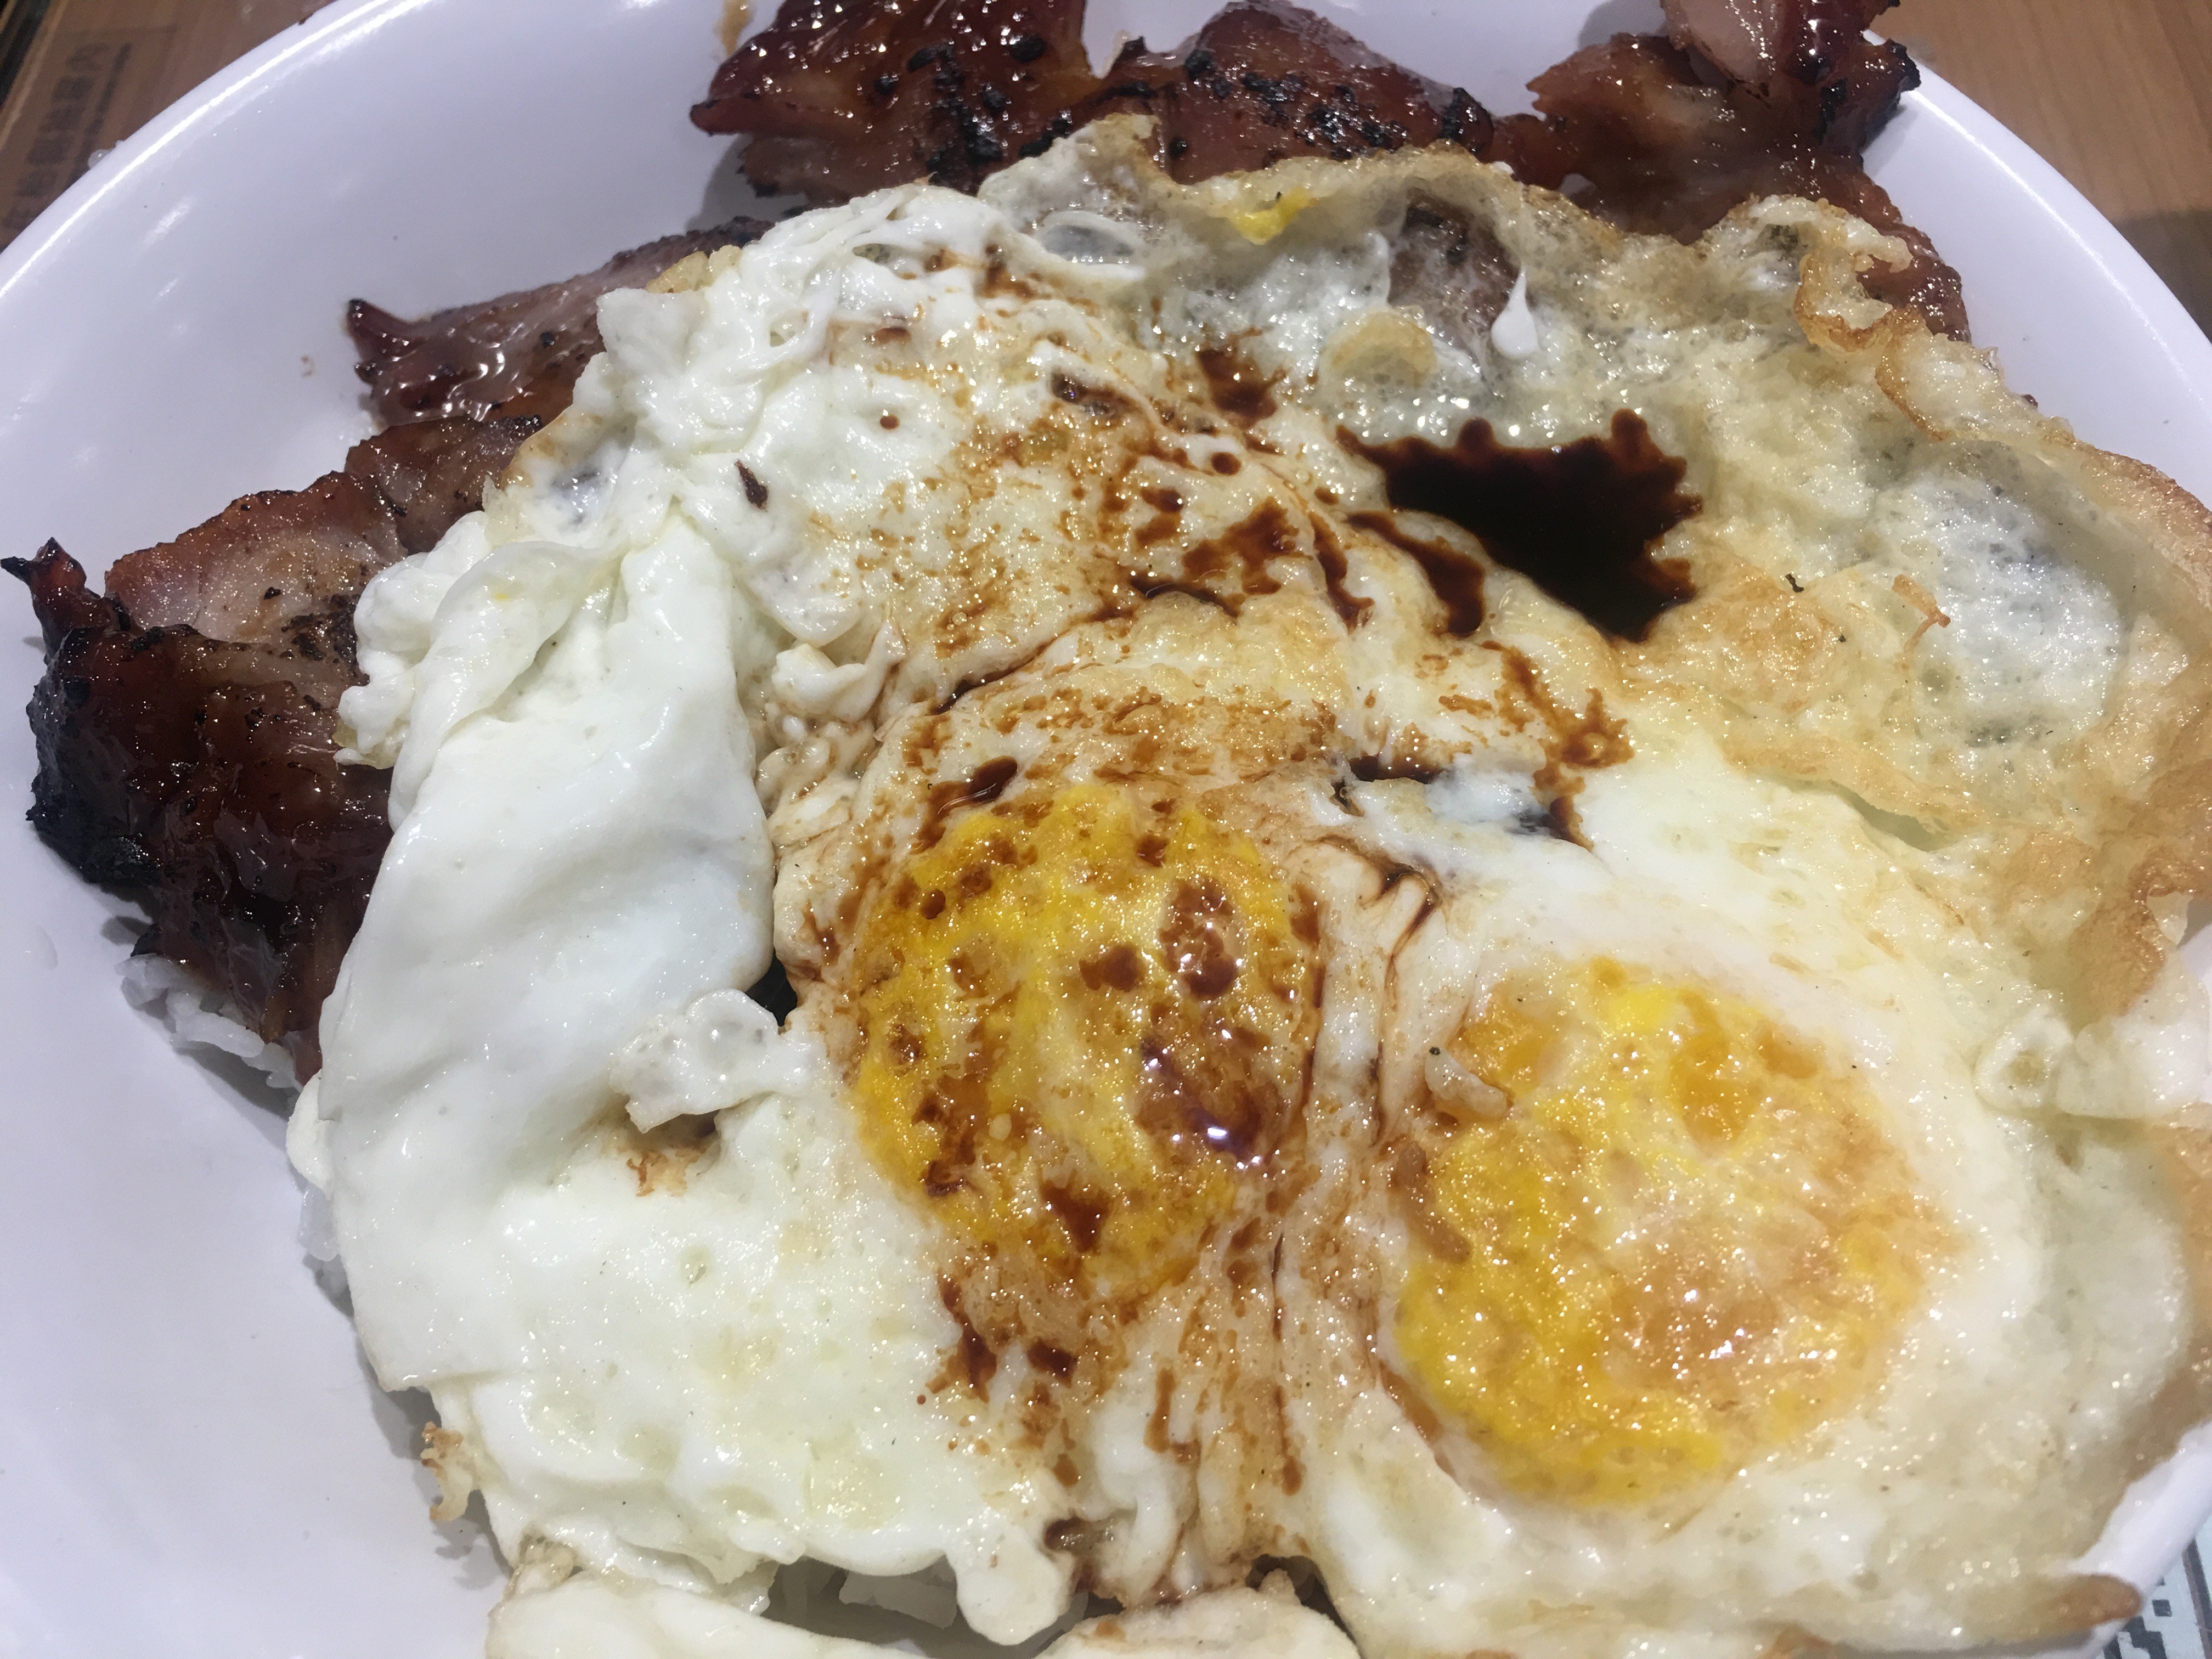 “Sorrowful rice” - slices of barbecue pork on a bed of rice with a fried egg on top - at Men Wah Bing Teng